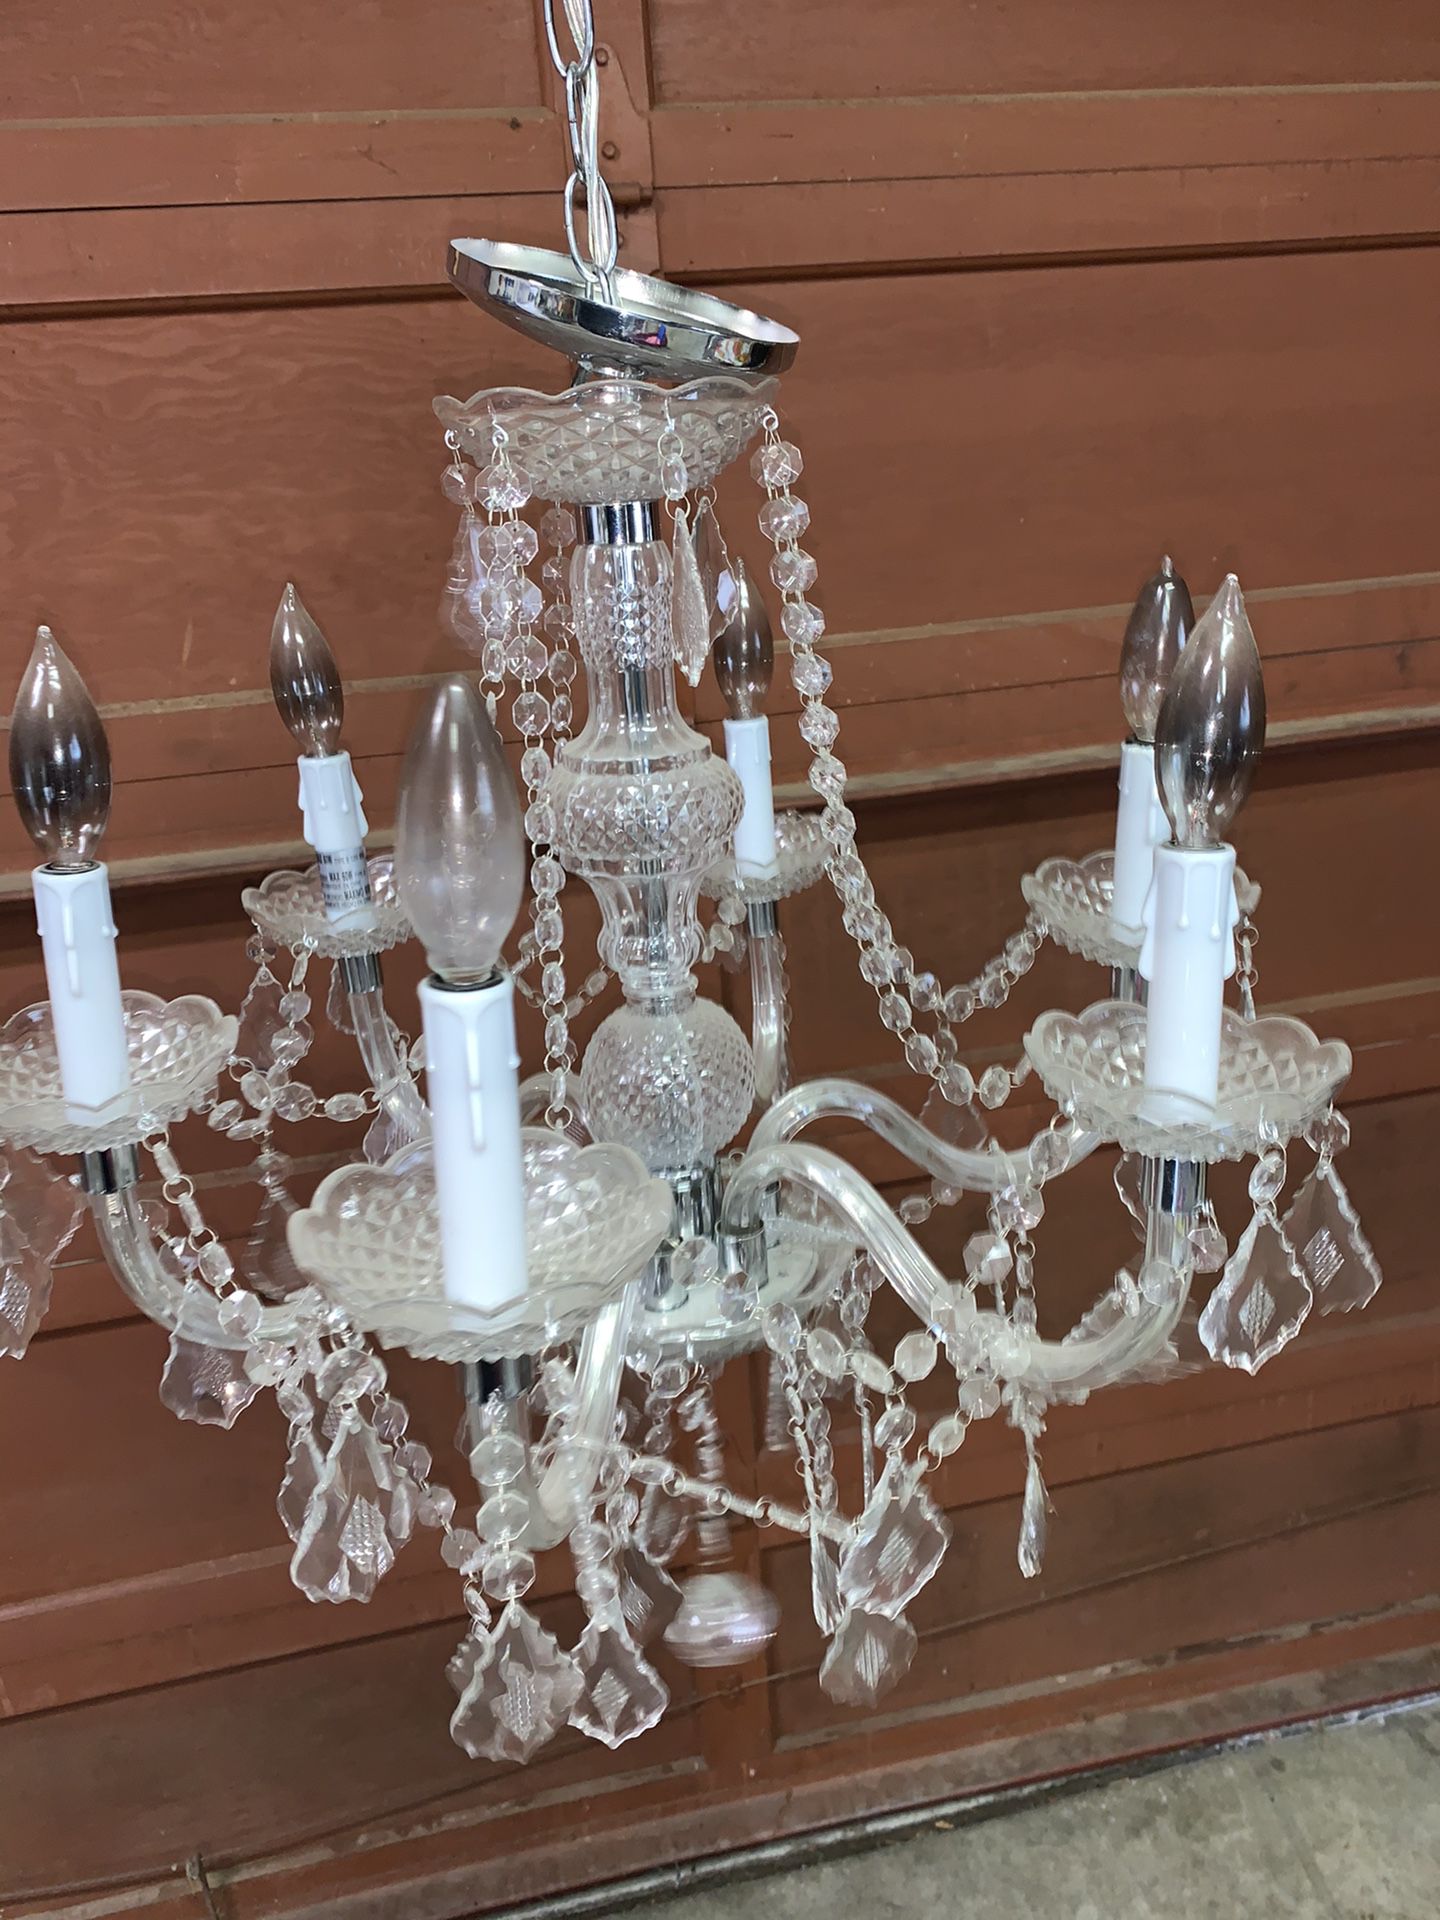 Chandelier free - sold - pick up is pending